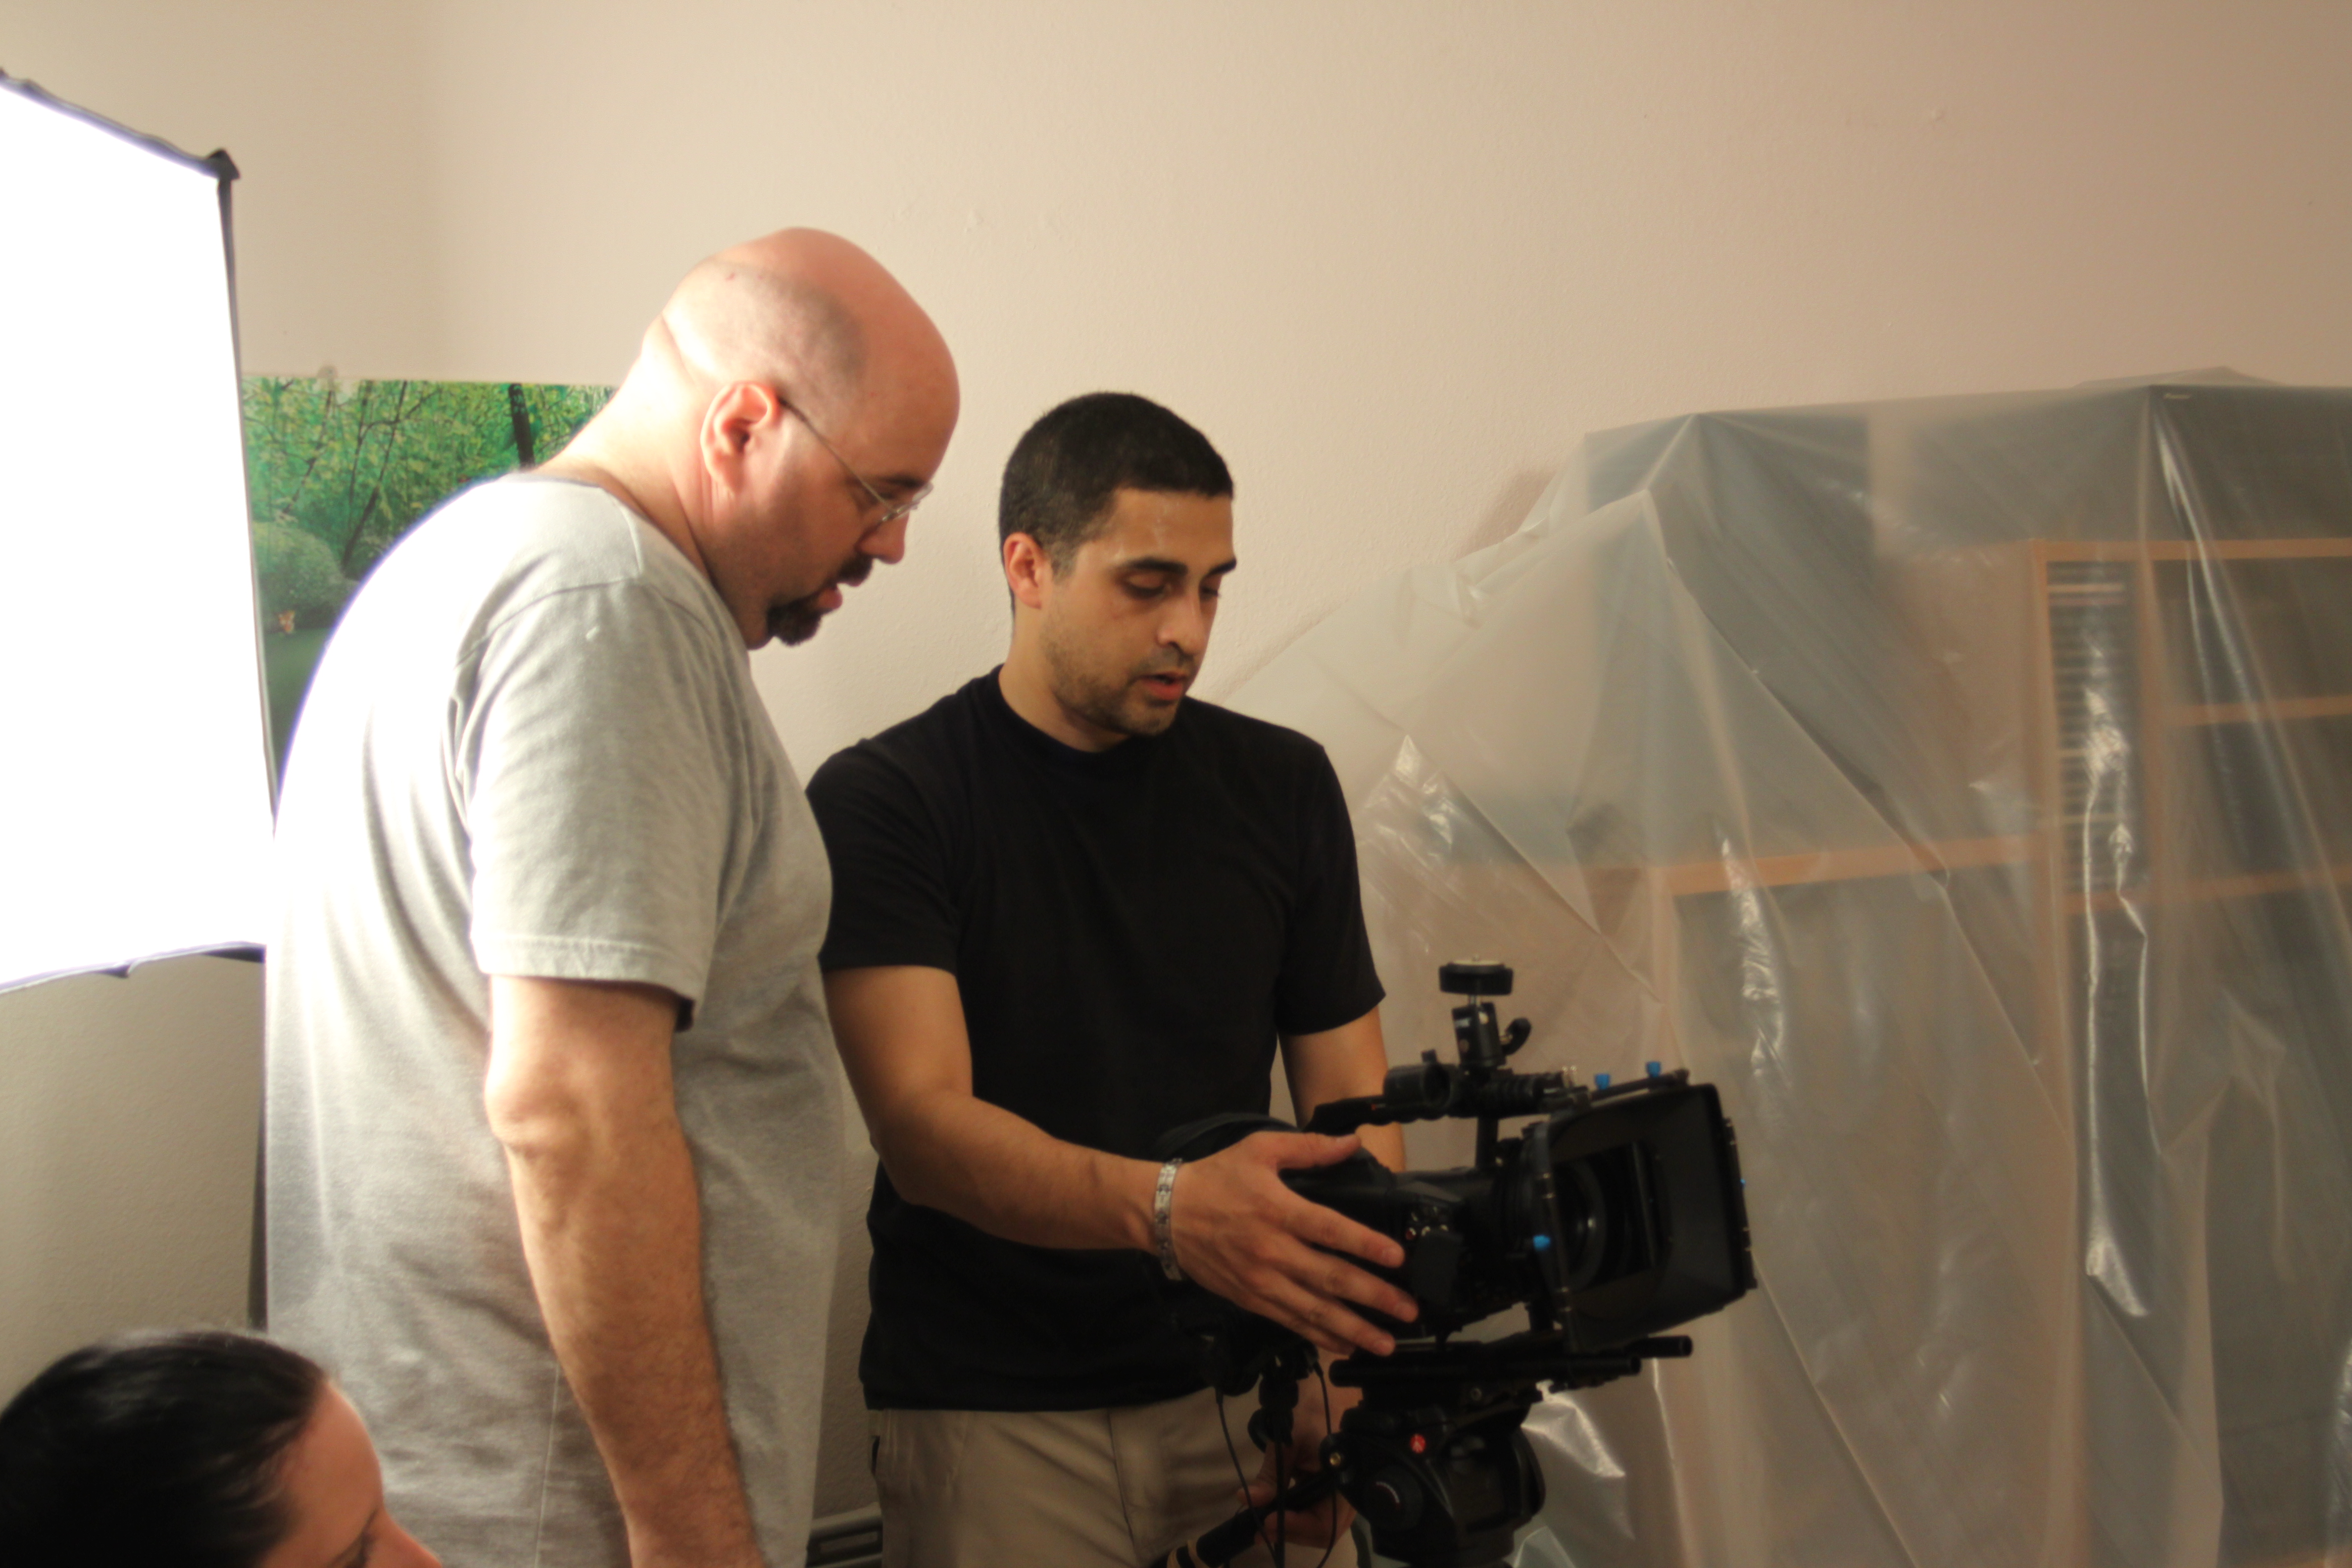 Director Donald E. Reynolds with Director of Photography Martin Lemaire on the set of TRU LUV.